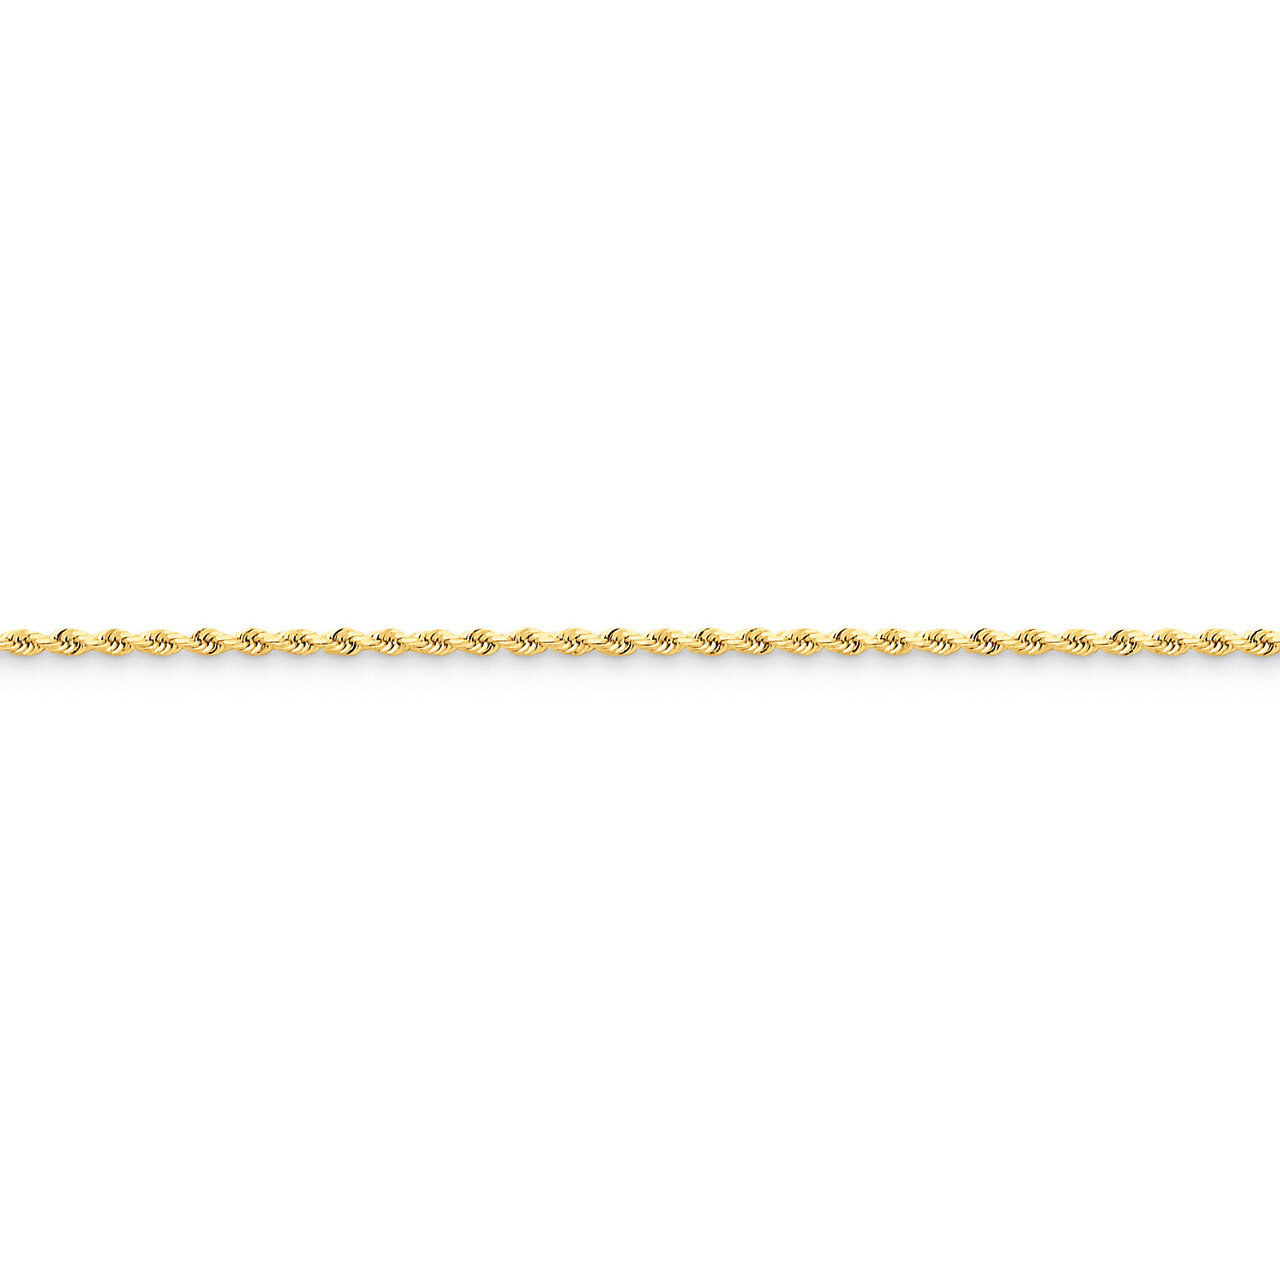 1.75mm Diamond-cut Rope with Lobster Clasp Chain 14 Inch 14k Gold 014L-14